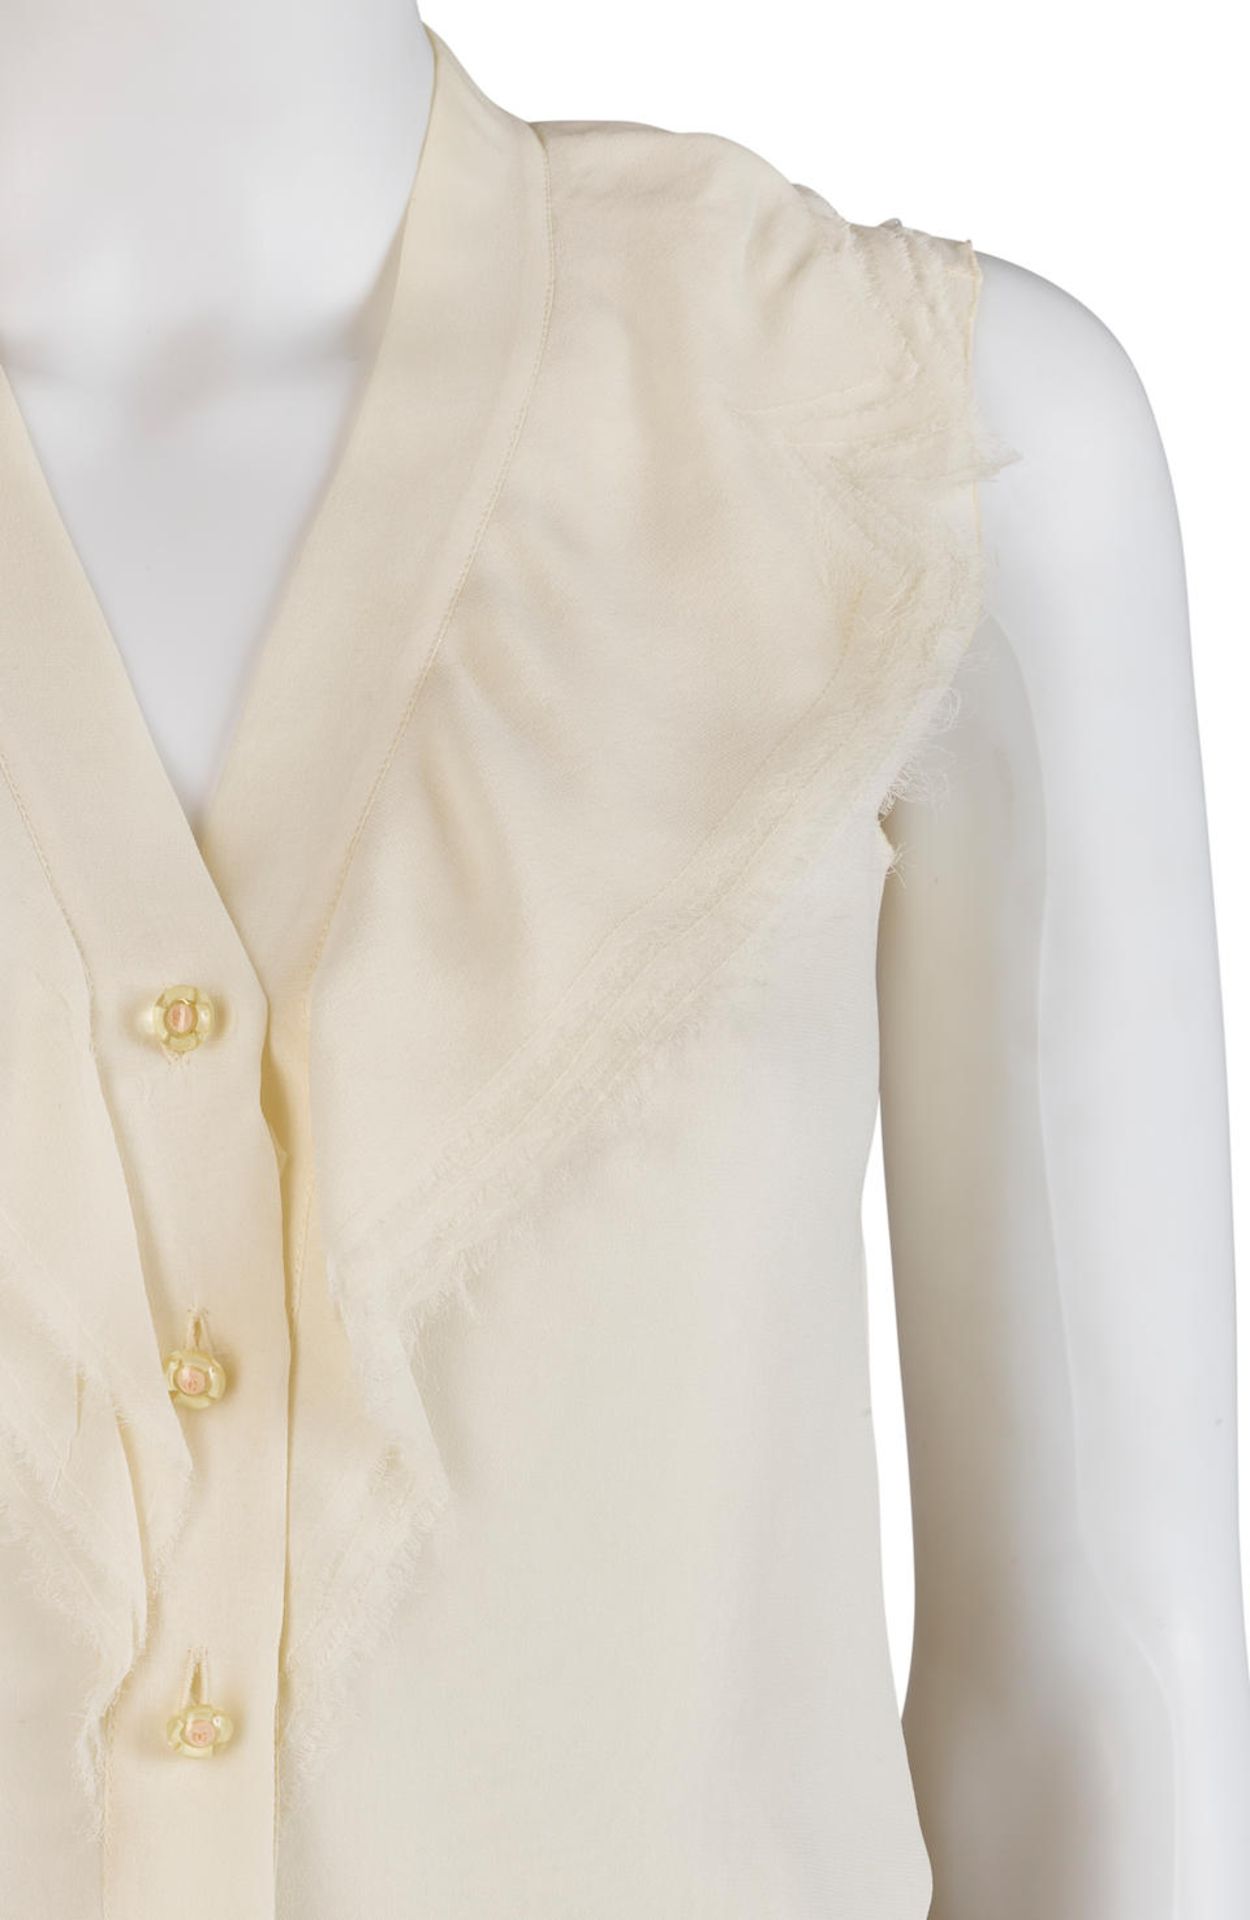 CHANEL: SLEEVELESS PLEATED SILK BLOUSE Spring 2004 - Image 2 of 2